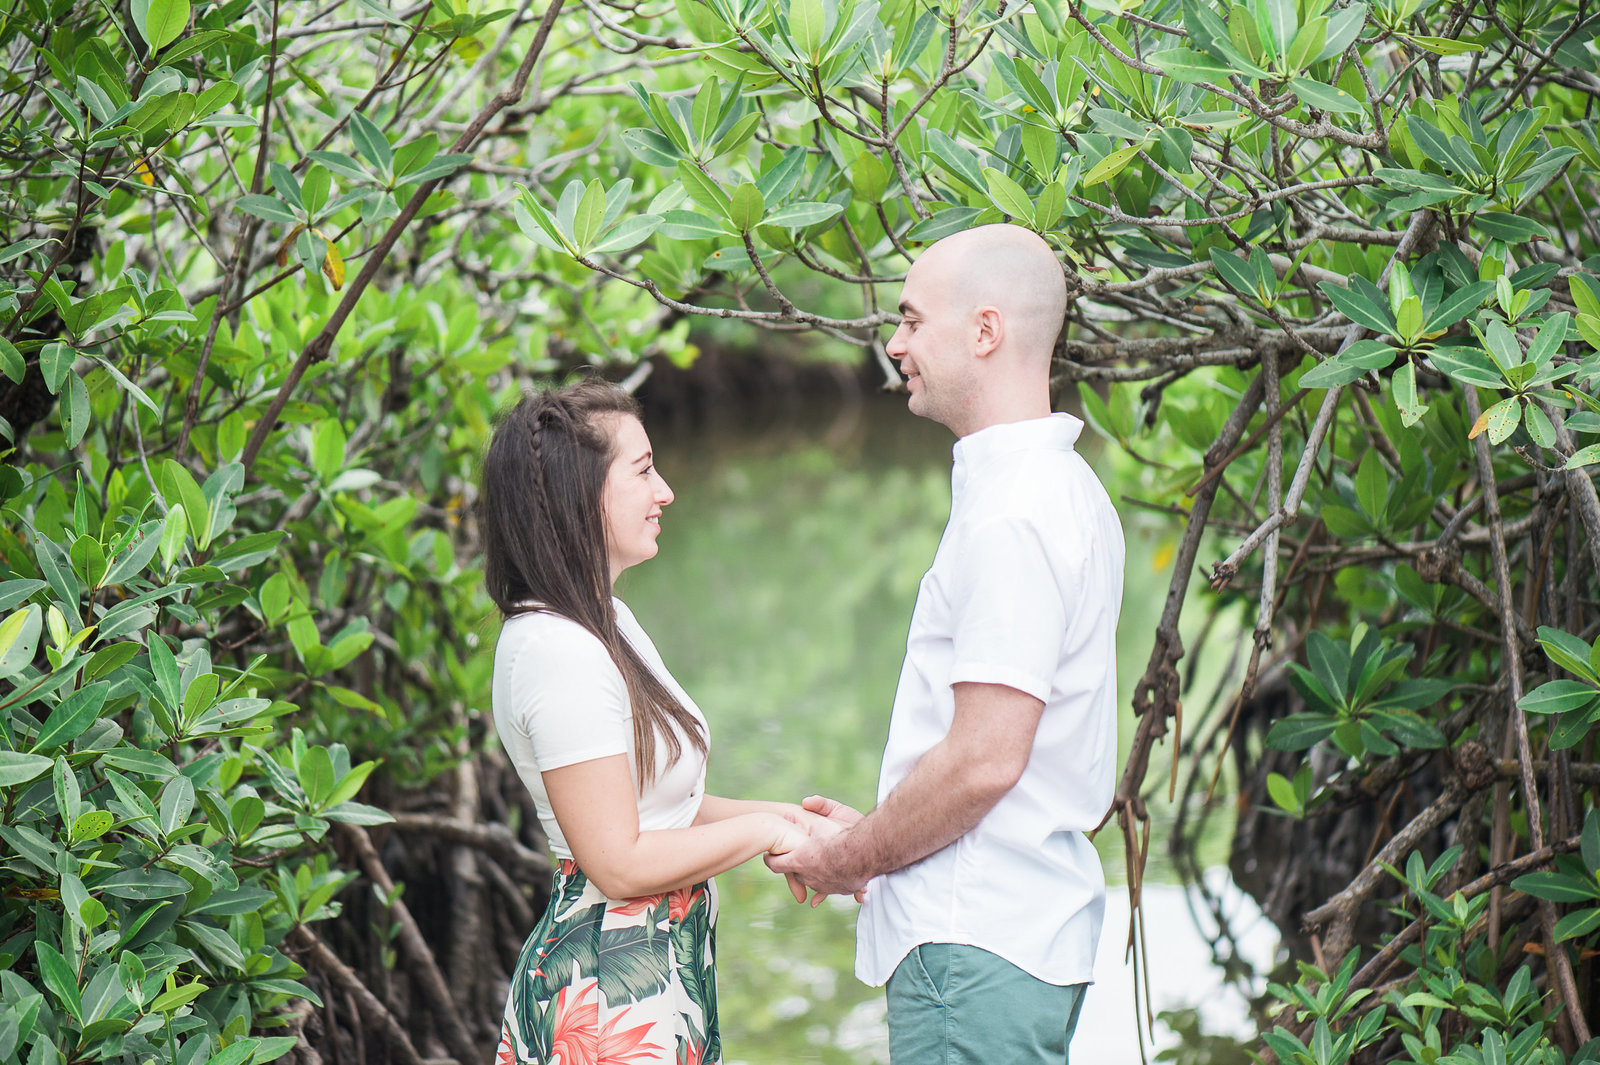 Key Largo Engagement Photography by Palm Beach Photography, Inc.